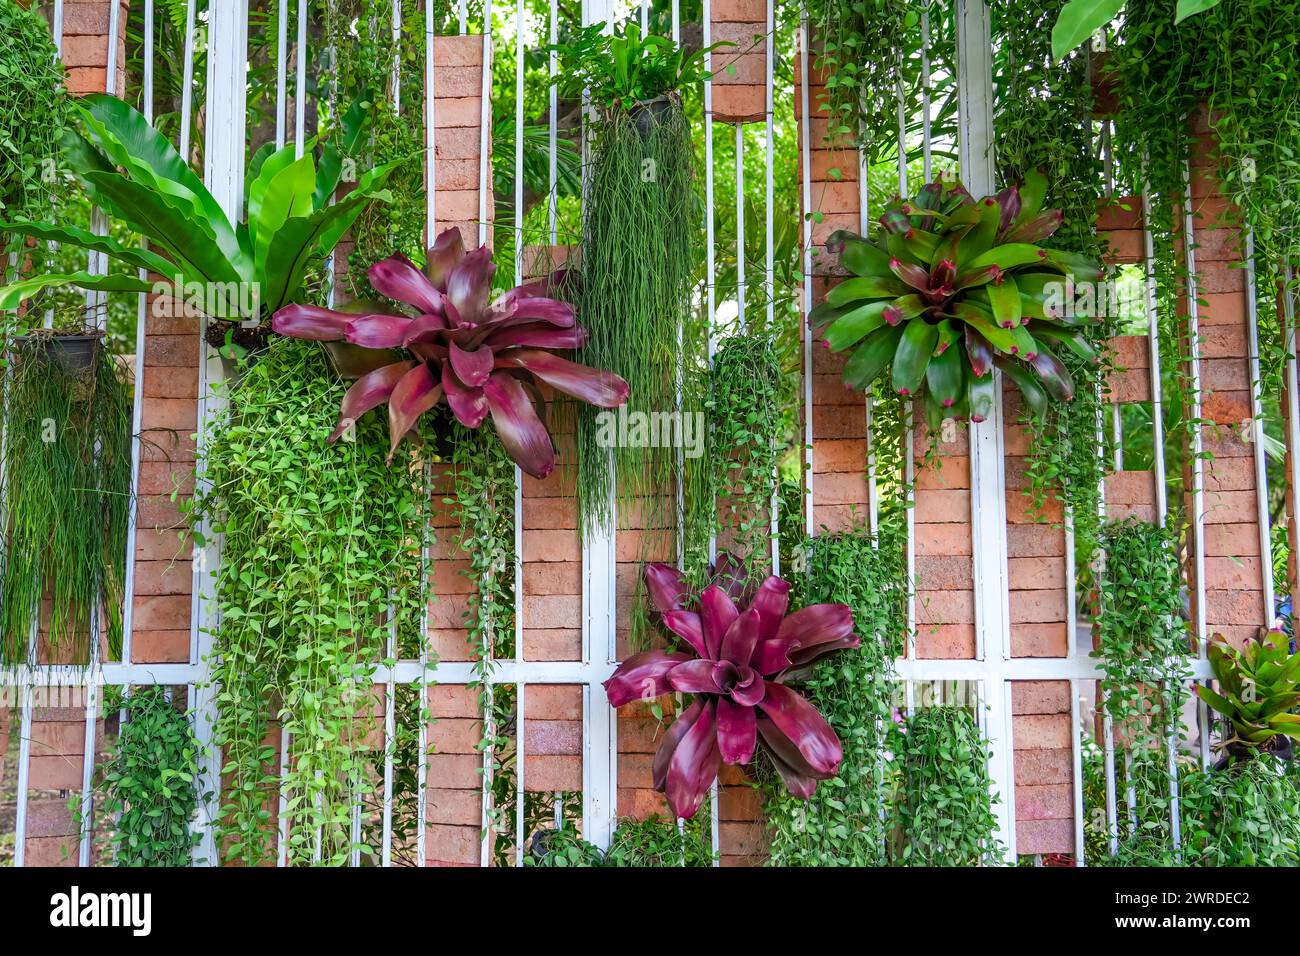 Bromelia multicolor plant with colorful leaves. Grow on the branches on a wooden decorative wall with other amelia liaon plants. Tropical nature green Stock Photo